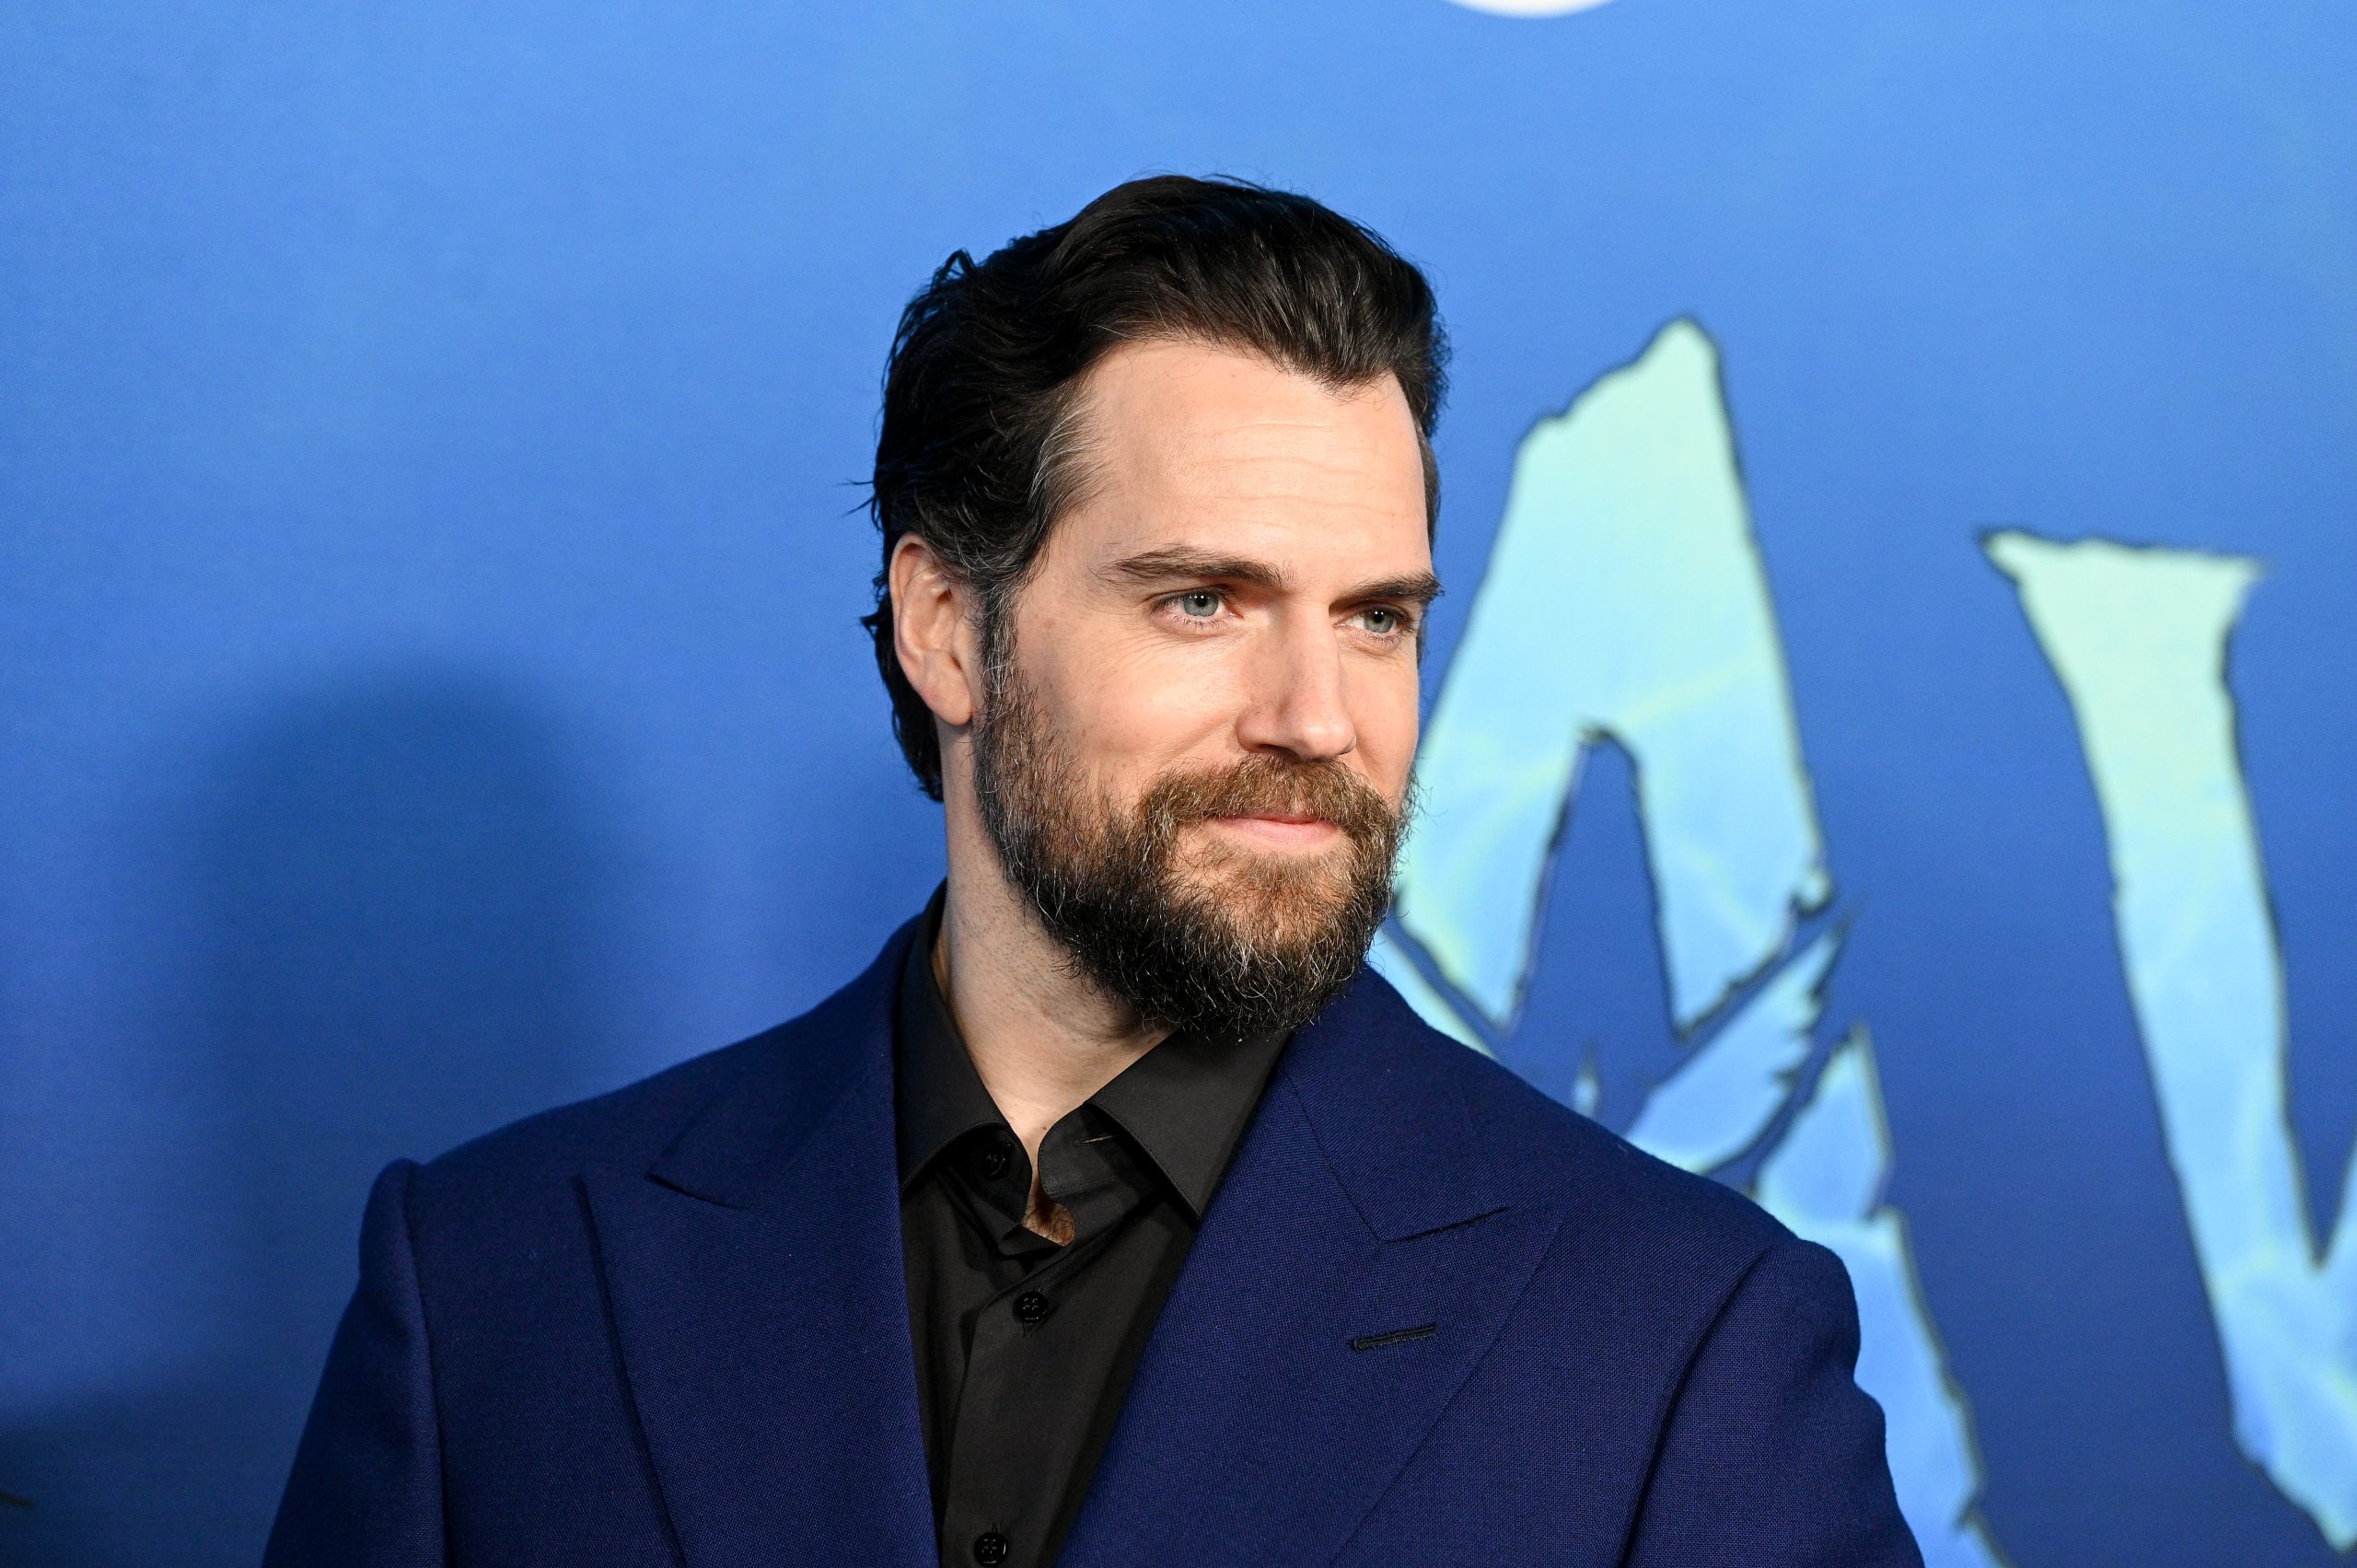 Henry Cavill at the premiere of "Avatar: The Way of Water"